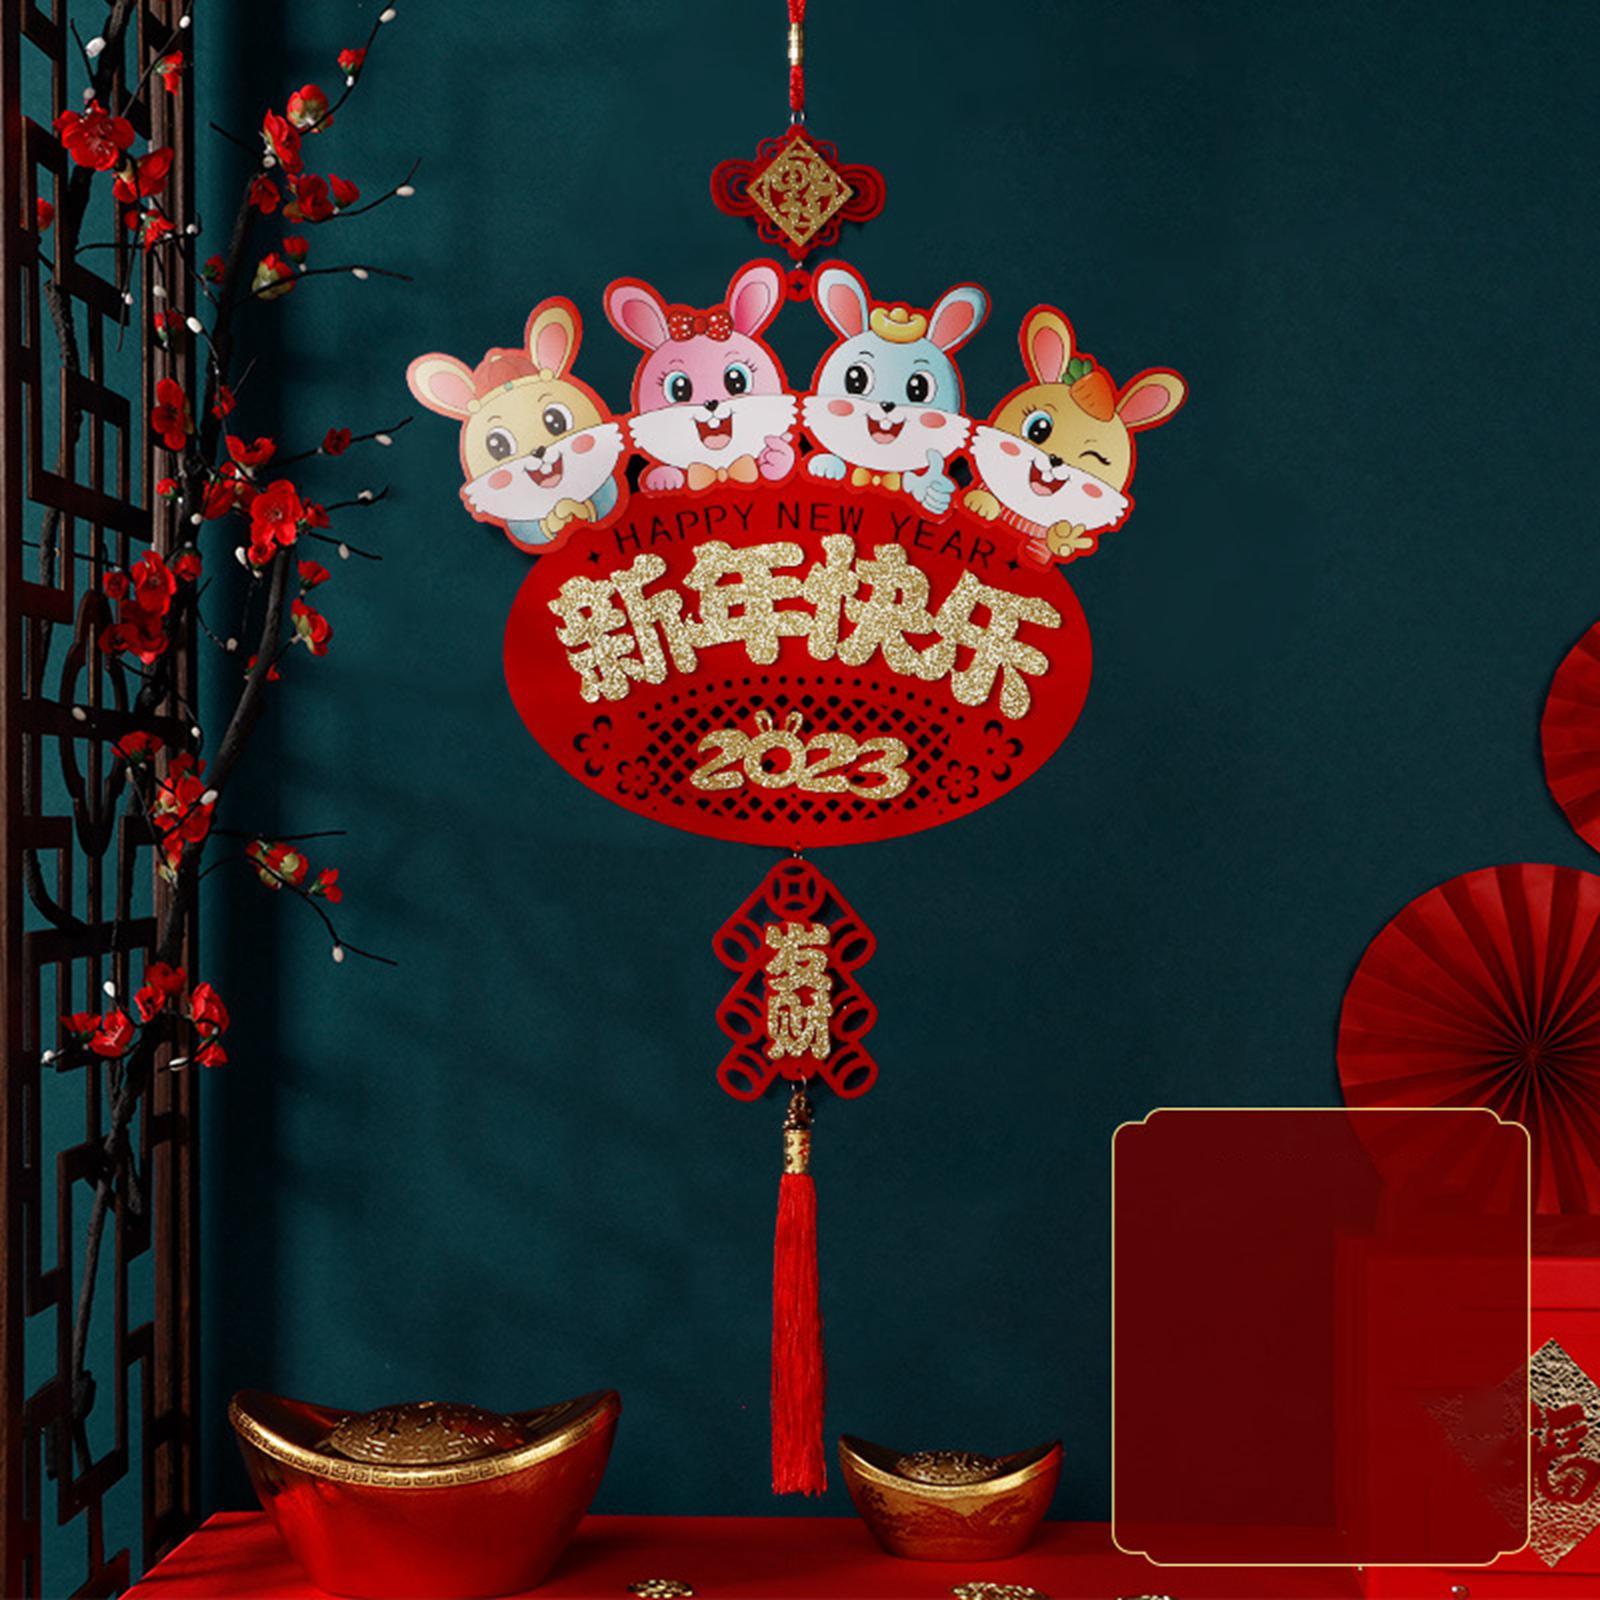 Spring Festival Decor Wall Hanging Pendant Chinese New Year Decorations for Celebration Souvenir